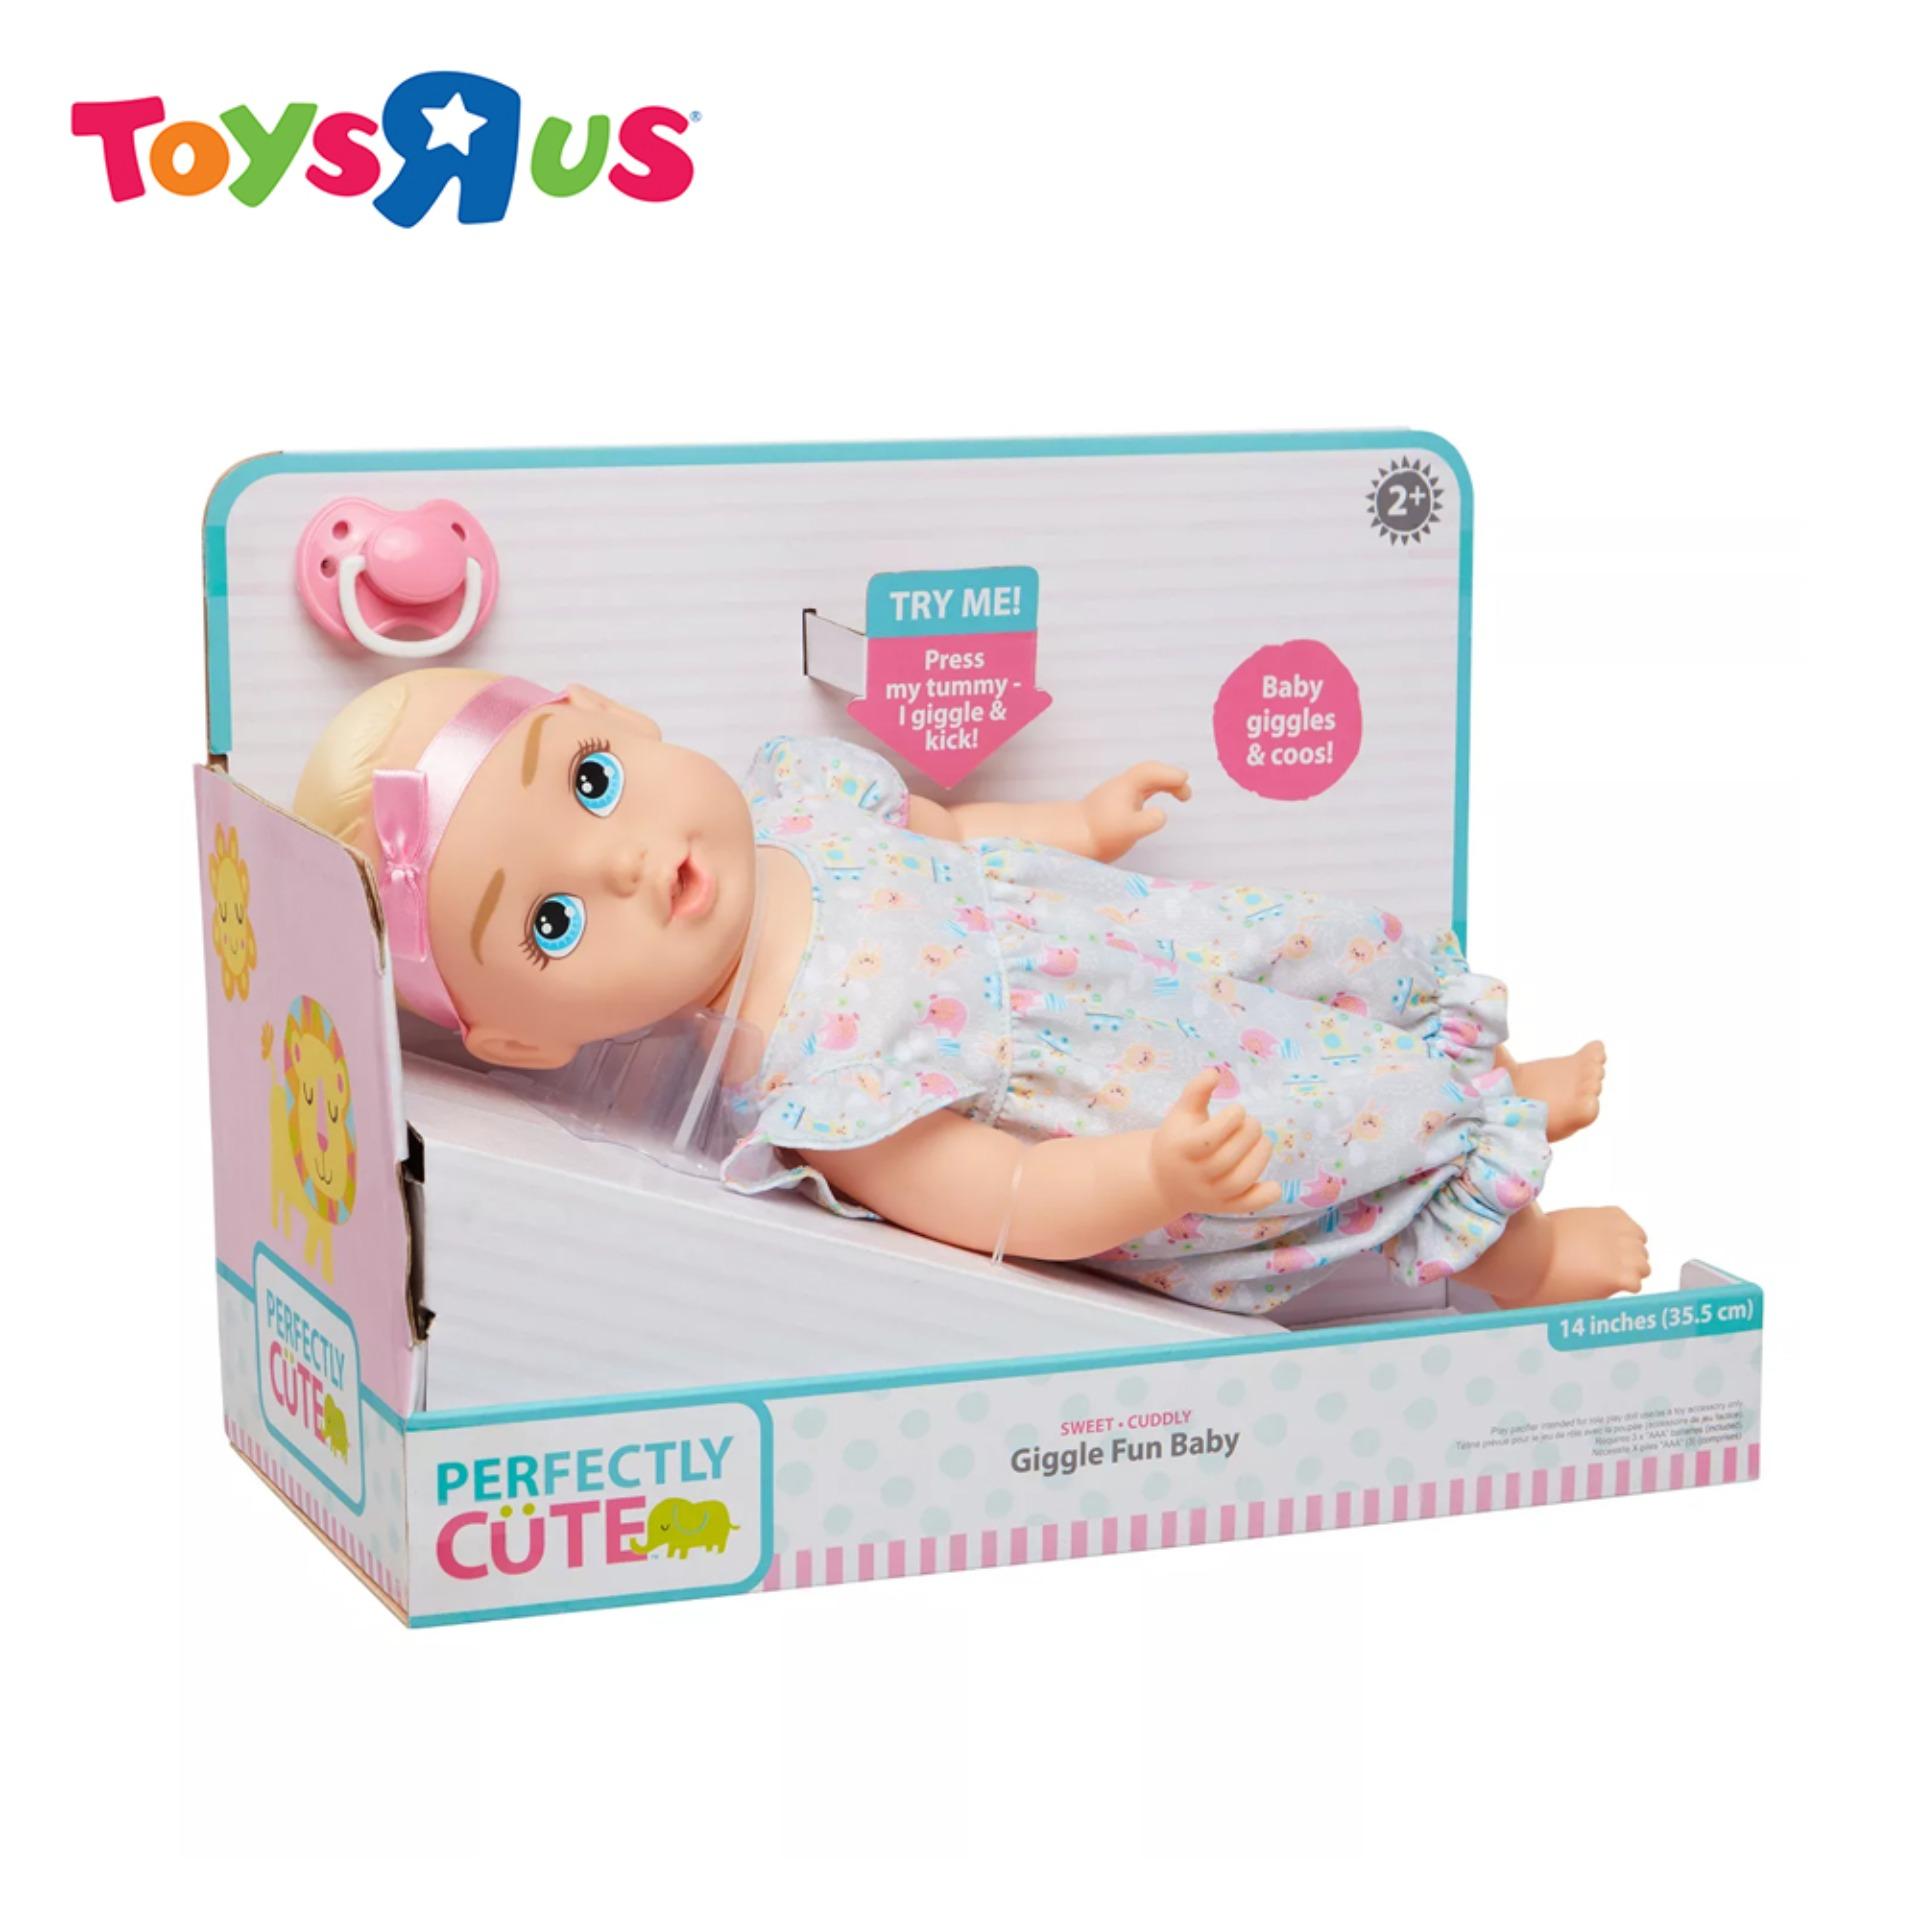 Perfectly Cute 14 inch Giggle Fun Baby Doll Toys R Us